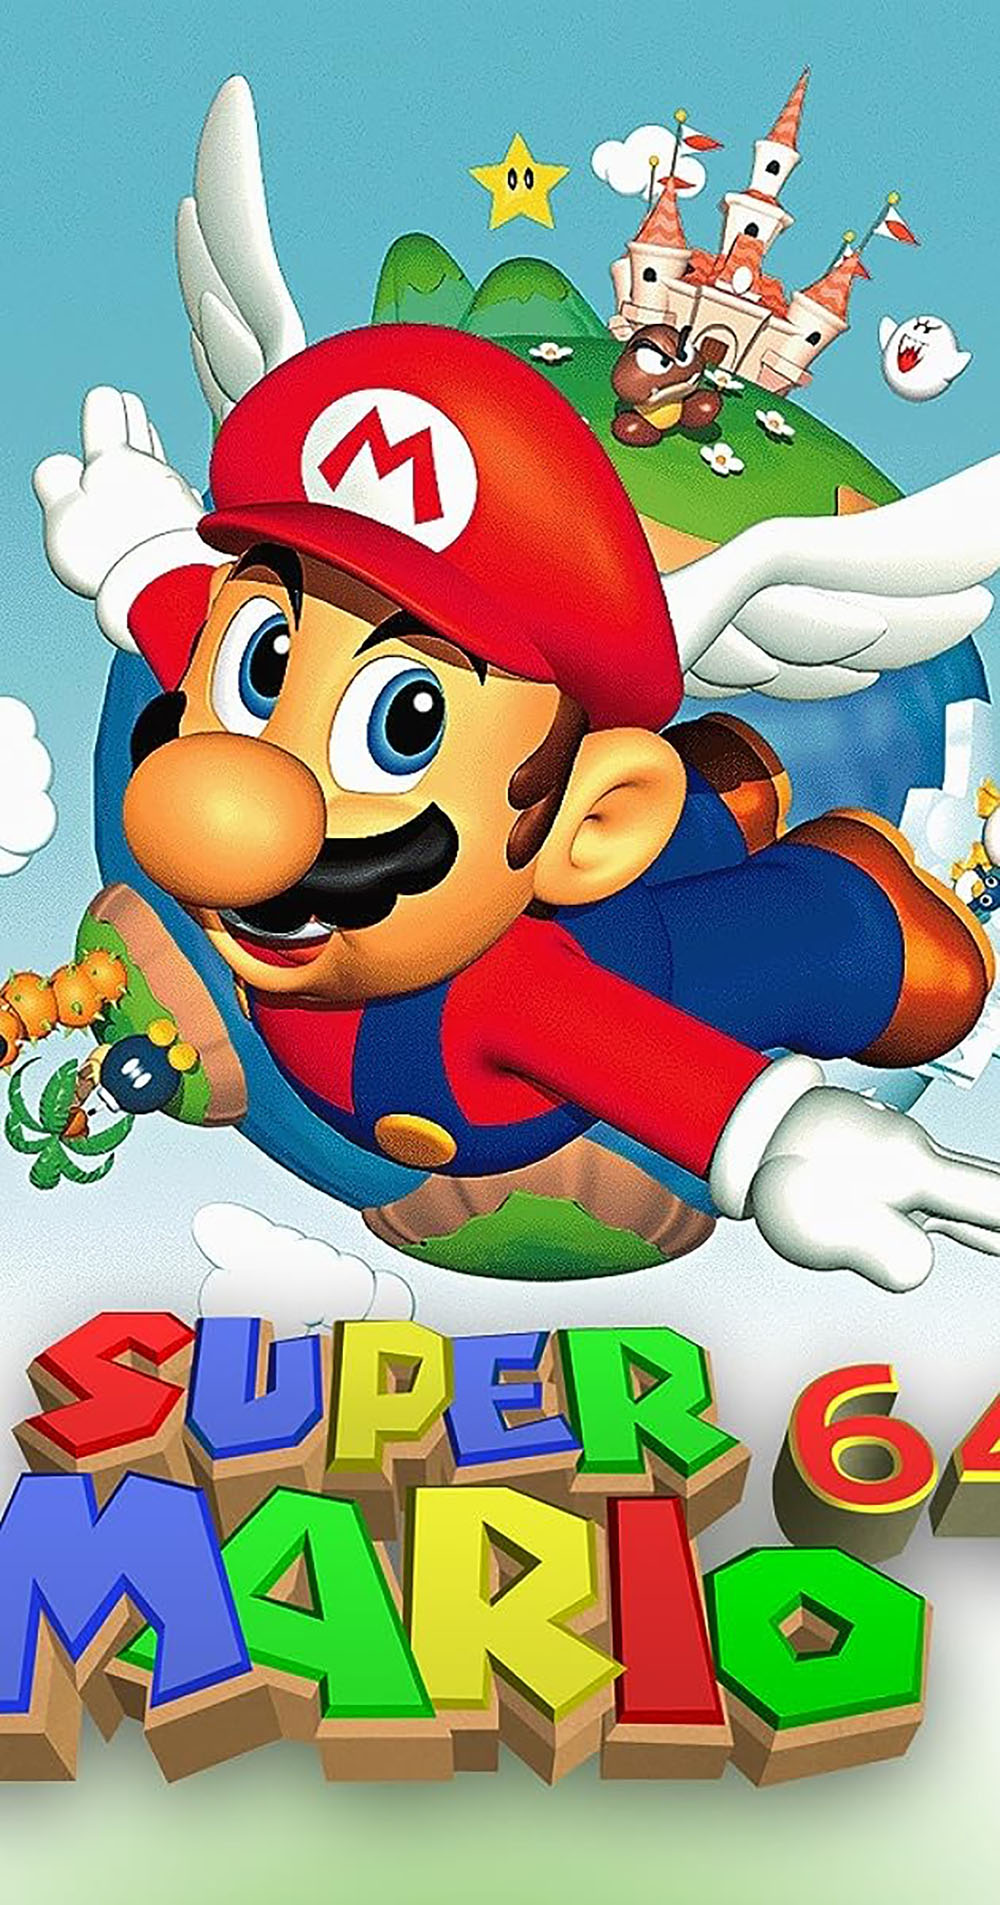 Super Mario 64 was Martinets first step into Nintendo voice-acting. This gig led to 27 years of voice-acting for the company.